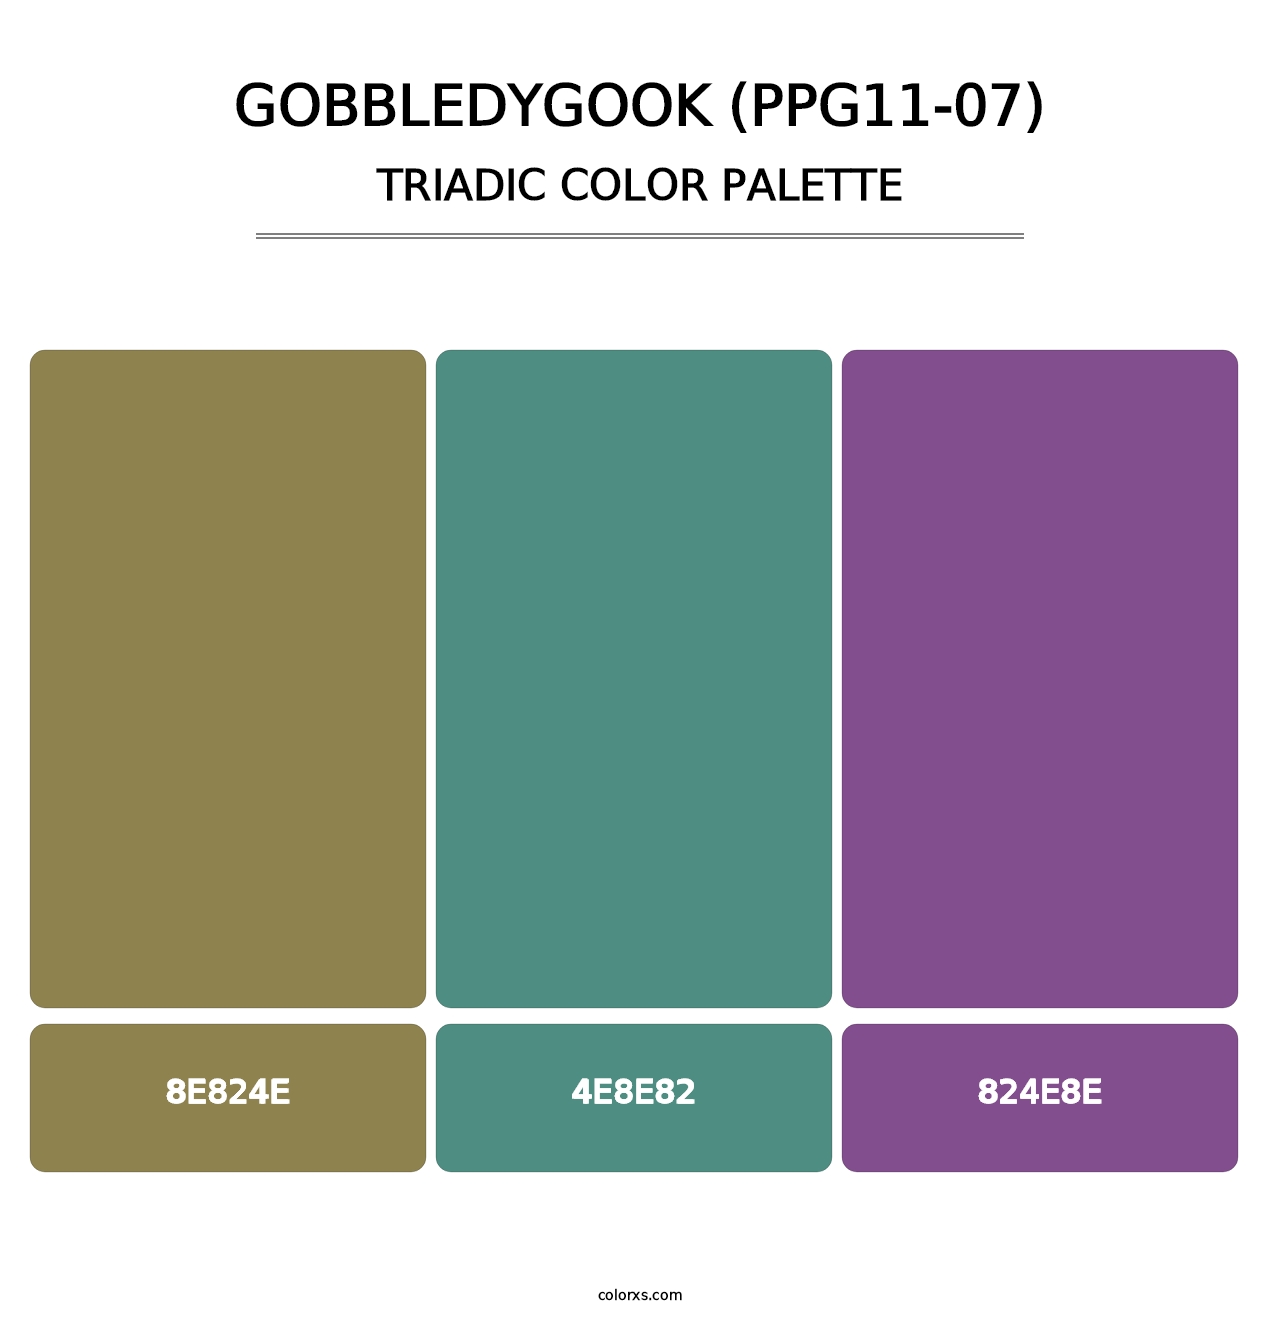 Gobbledygook (PPG11-07) - Triadic Color Palette